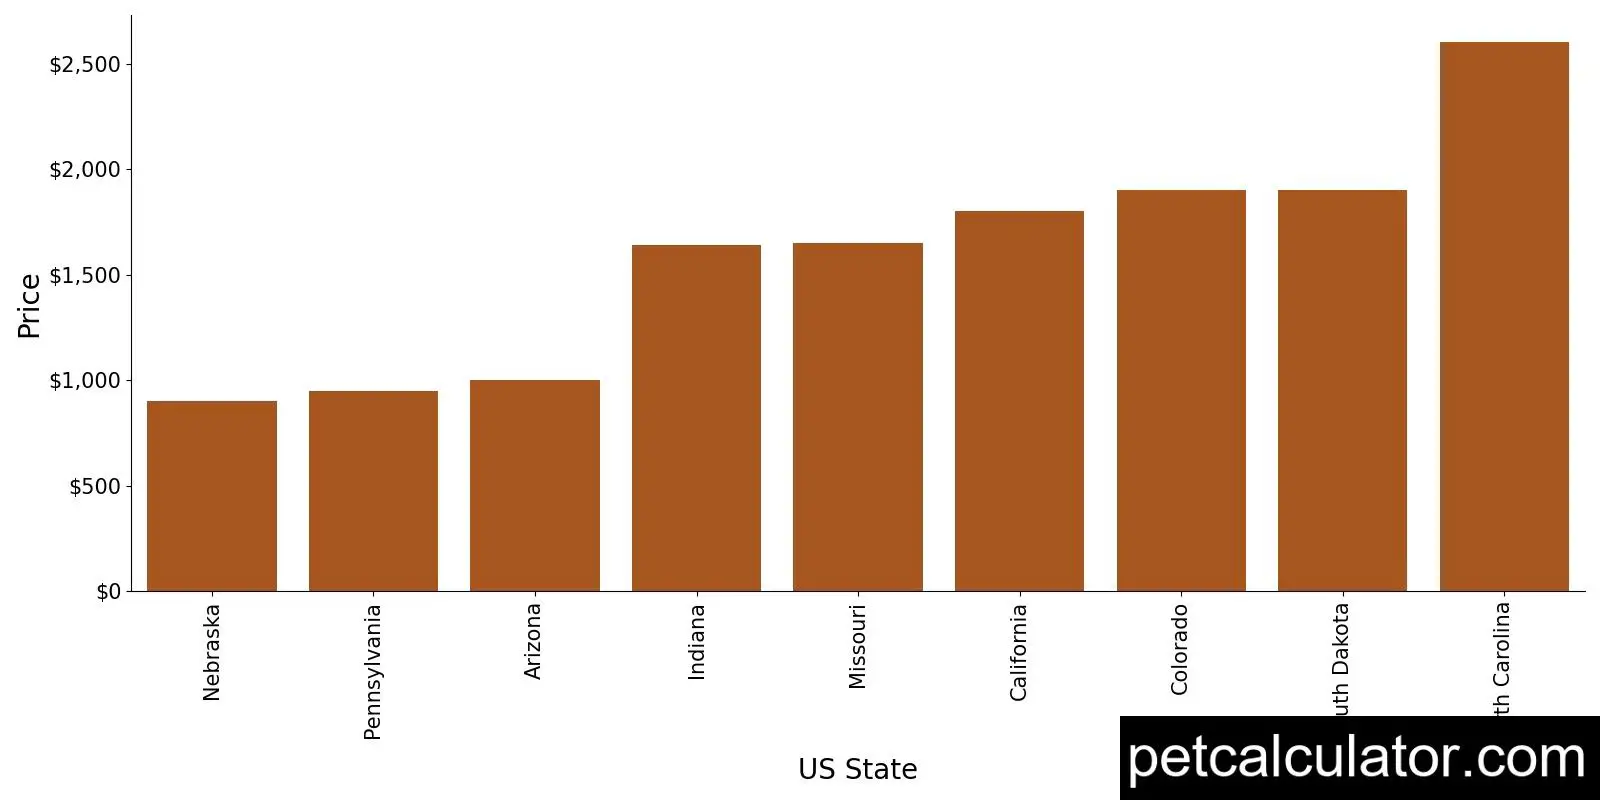 Price of Bordoodle by US State 